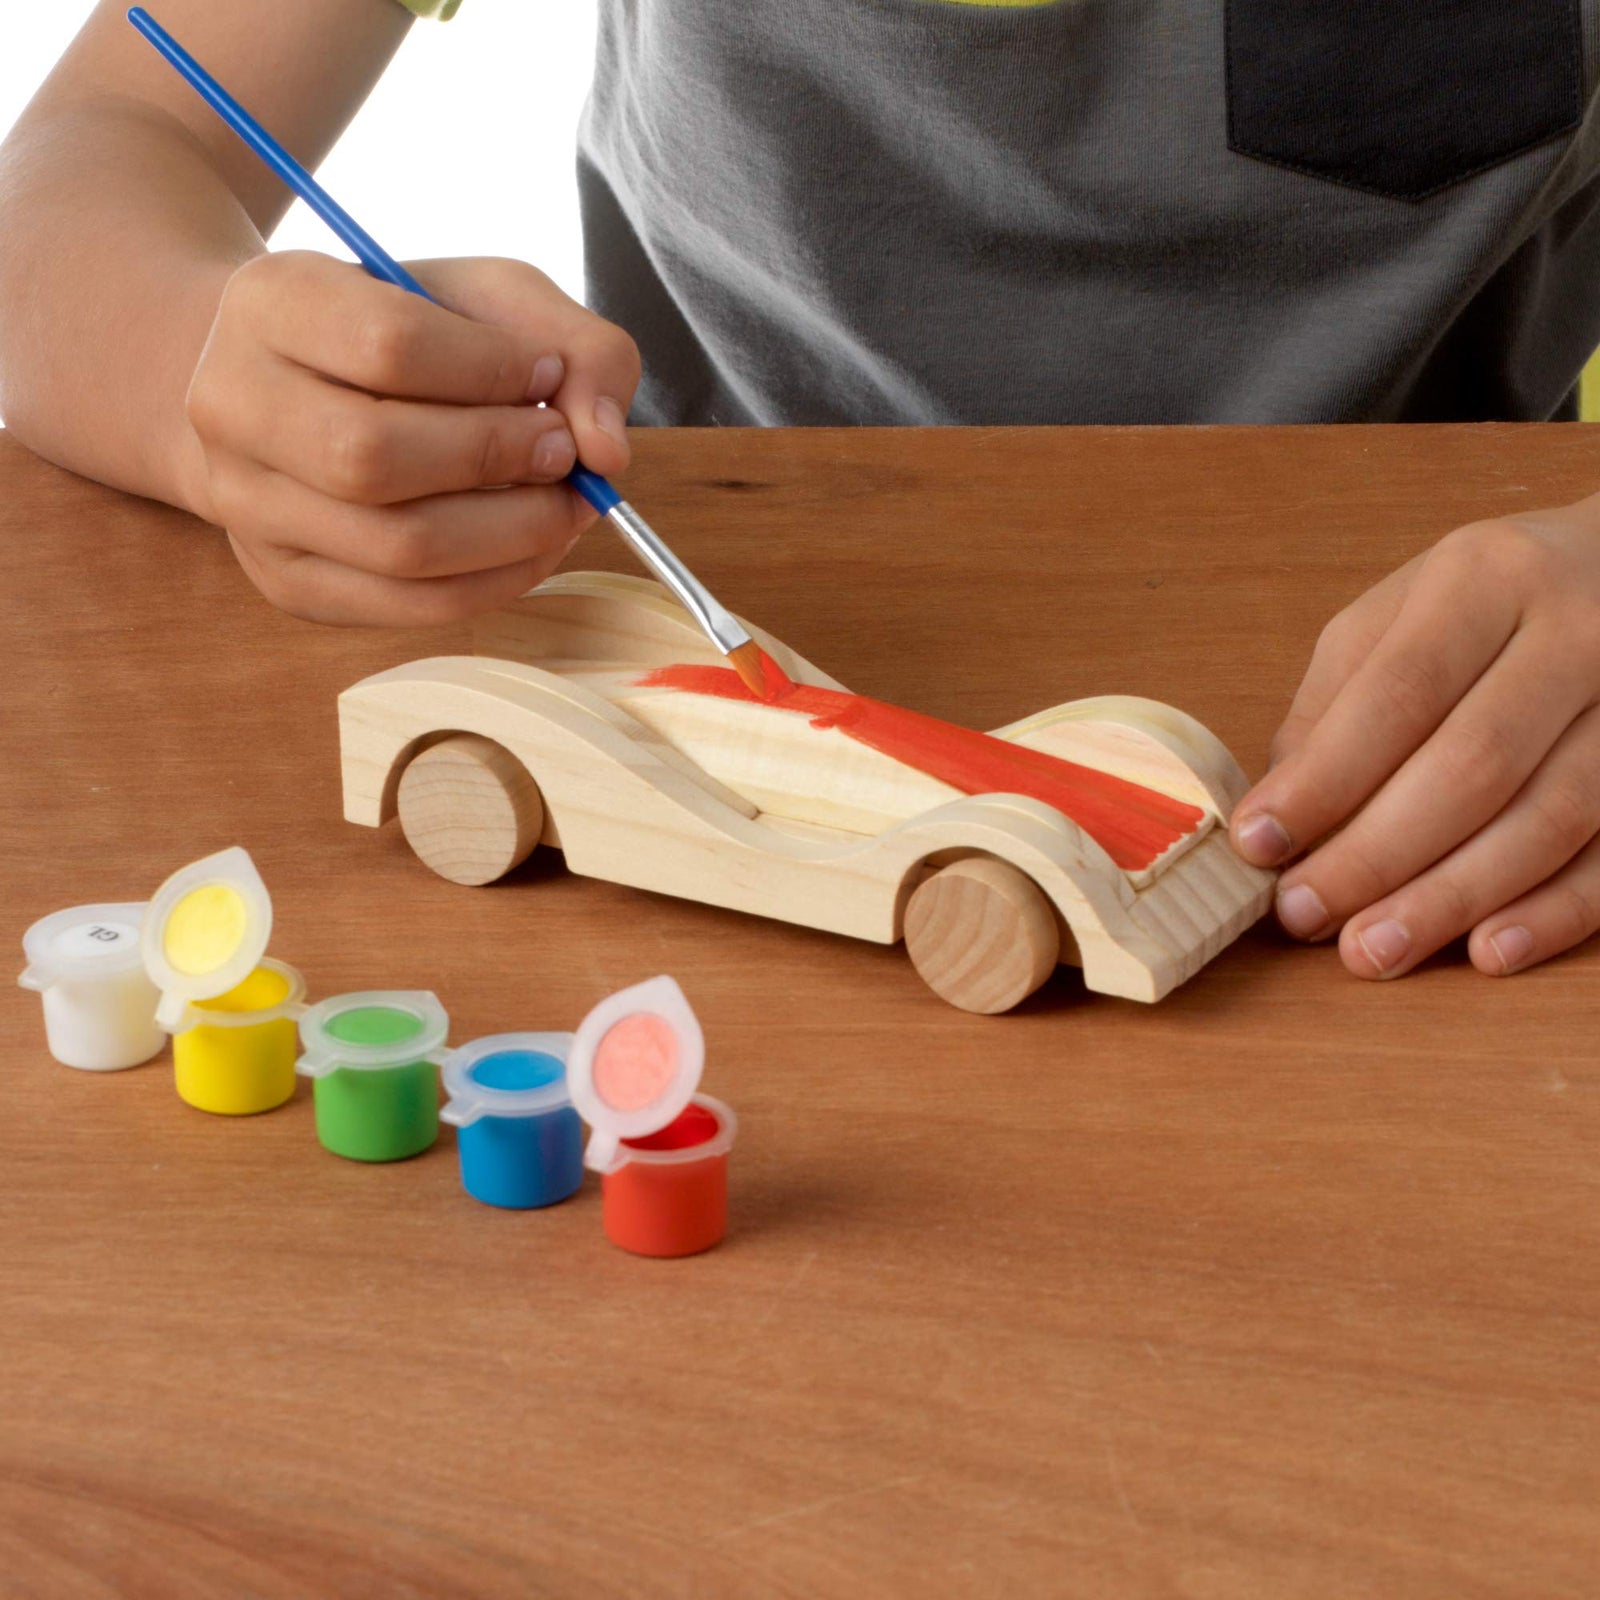 Made By Me Build & Paint Your Own Wooden Cars by Horizon Group Usa, DIY Wood Craft Kit, Easy To Assemble & Paint 3 Race Cars, Multicolored